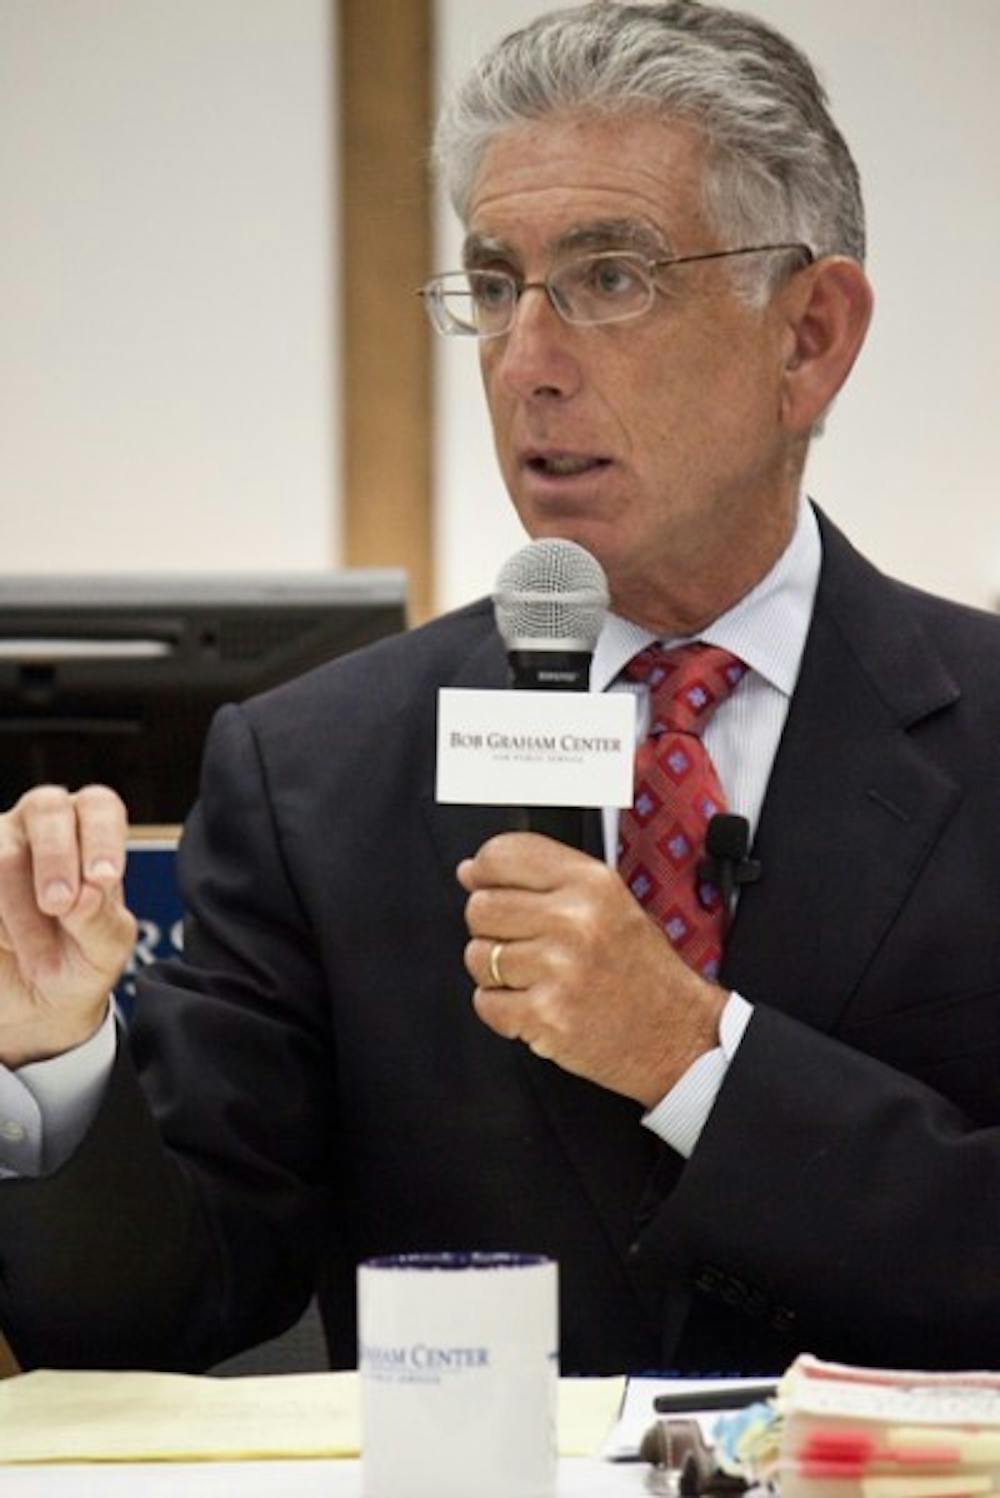 <p>Phil Angelides, who chaired the U.S. Financial Crisis Inquiry Commission, discussed the current economic and financial crisis to students and faculty in Pugh Hall Thursday night.</p>